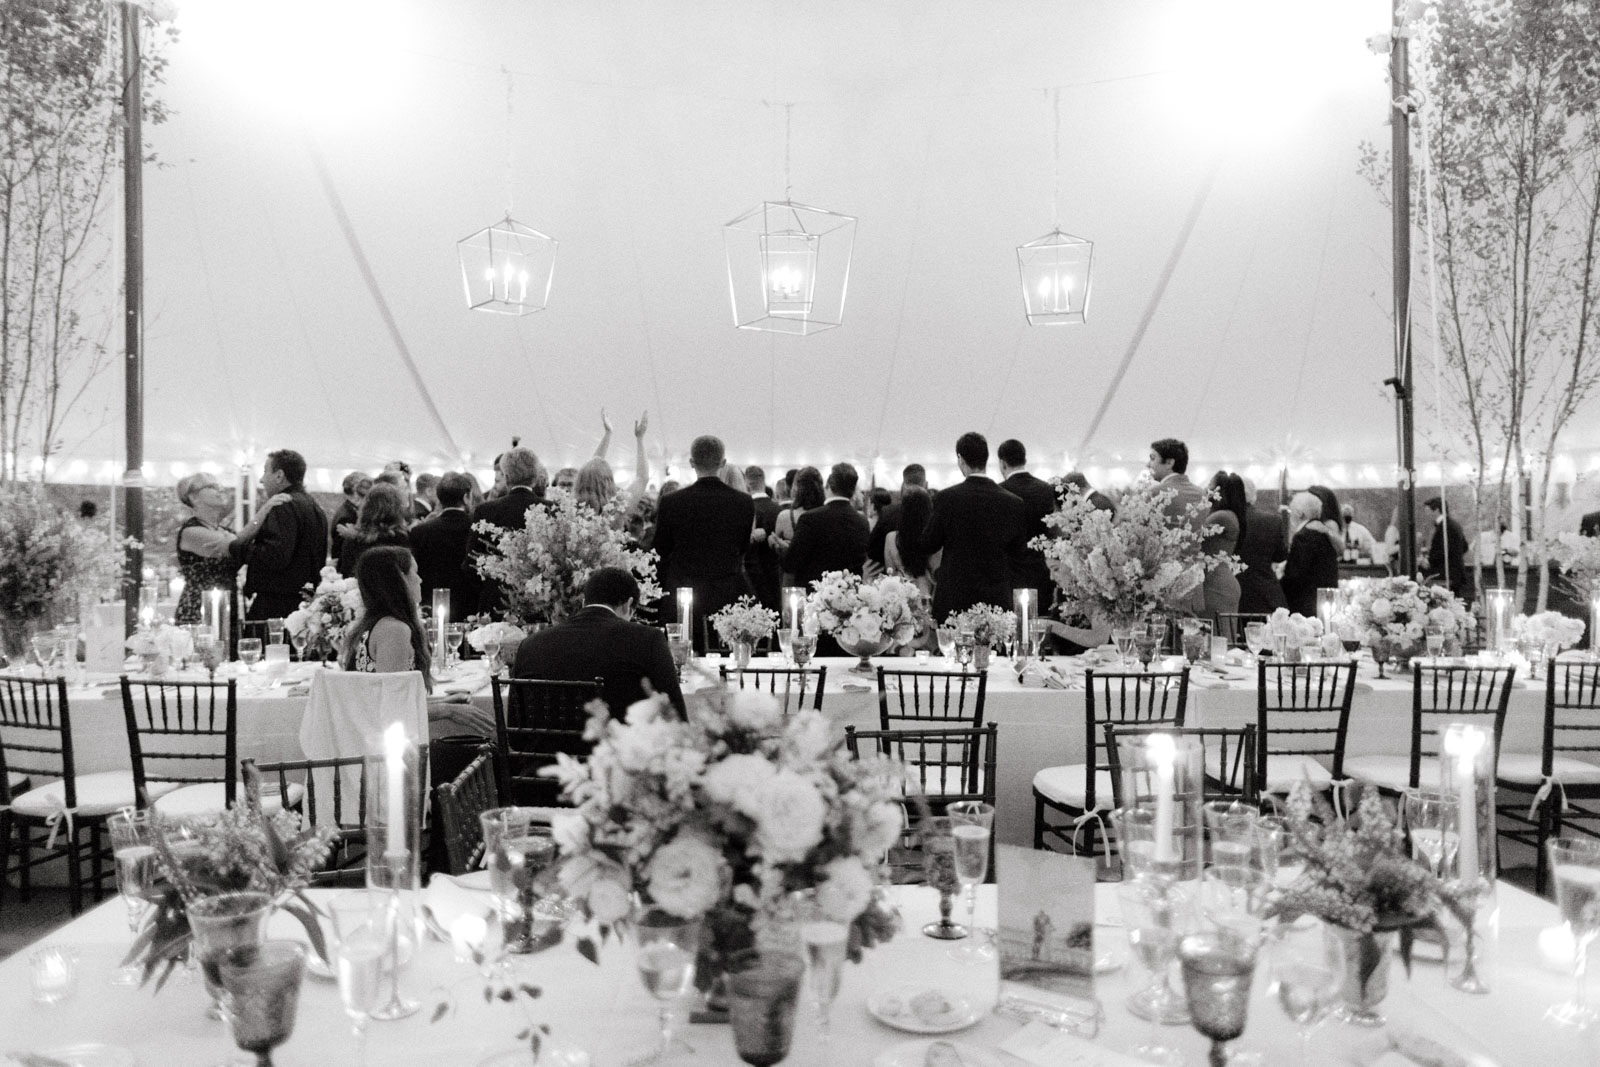 The guests are dancing in a wedding reception at the Lion Rock Farm. Destination wedding image by Jenny Fu Studio